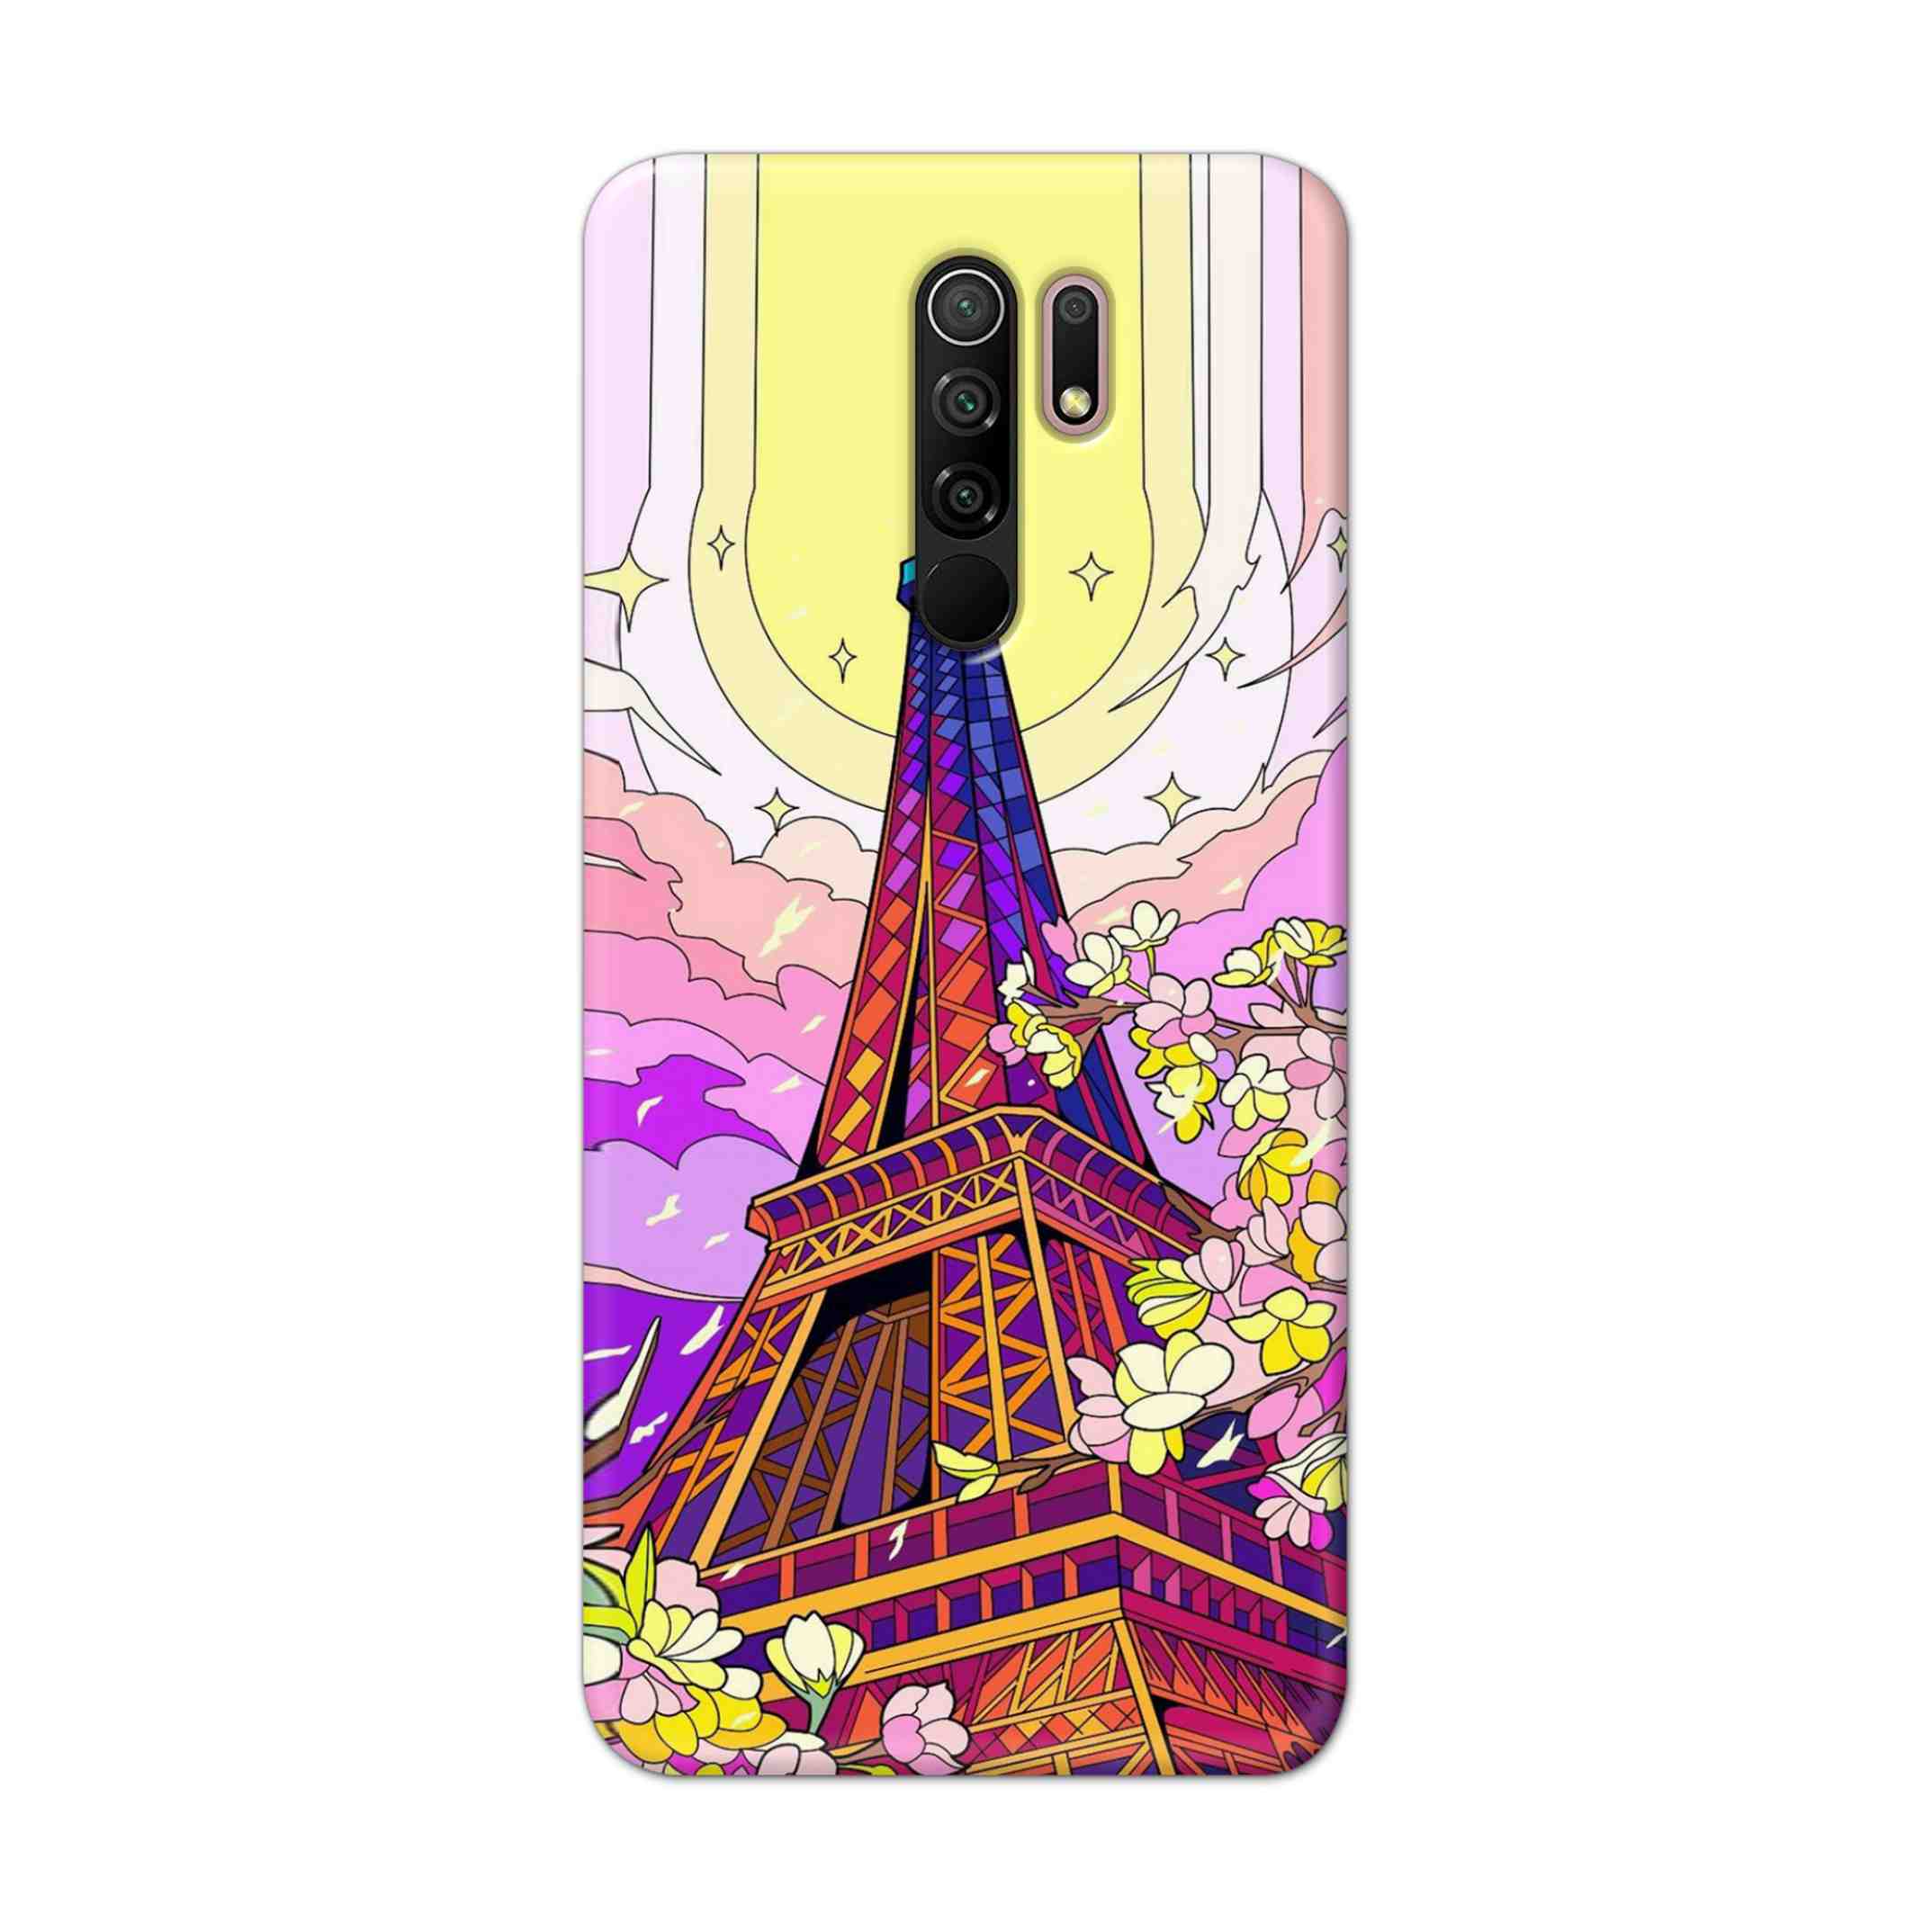 Buy Eiffel Tower Hard Back Mobile Phone Case Cover For Xiaomi Redmi 9 Prime Online